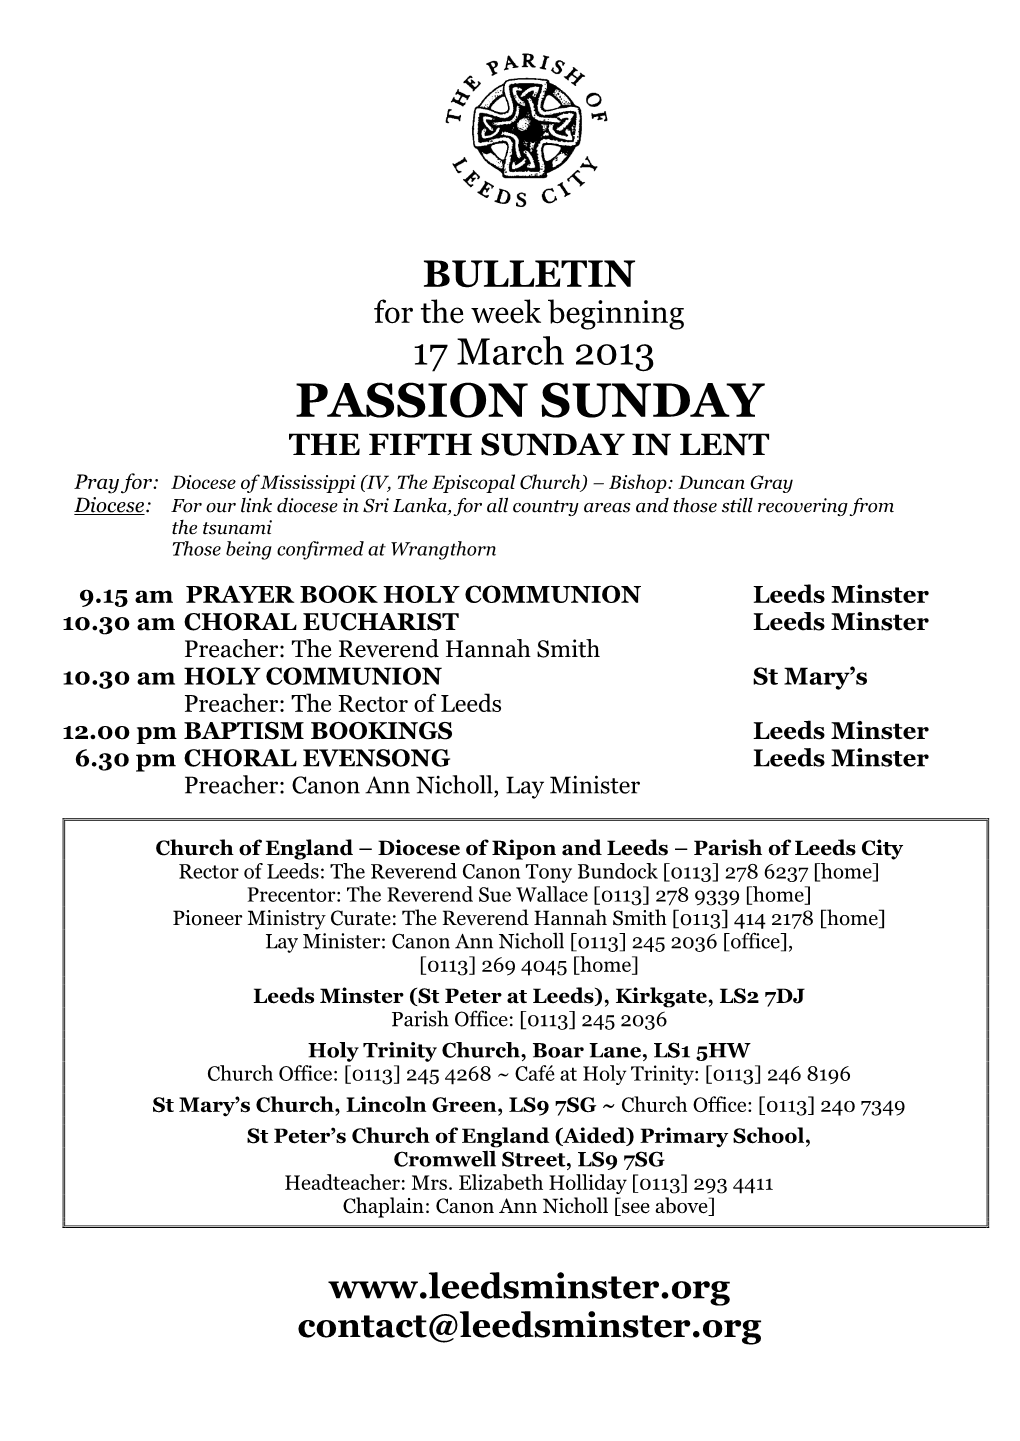 Passion Sunday the Fifth Sunday in Lent